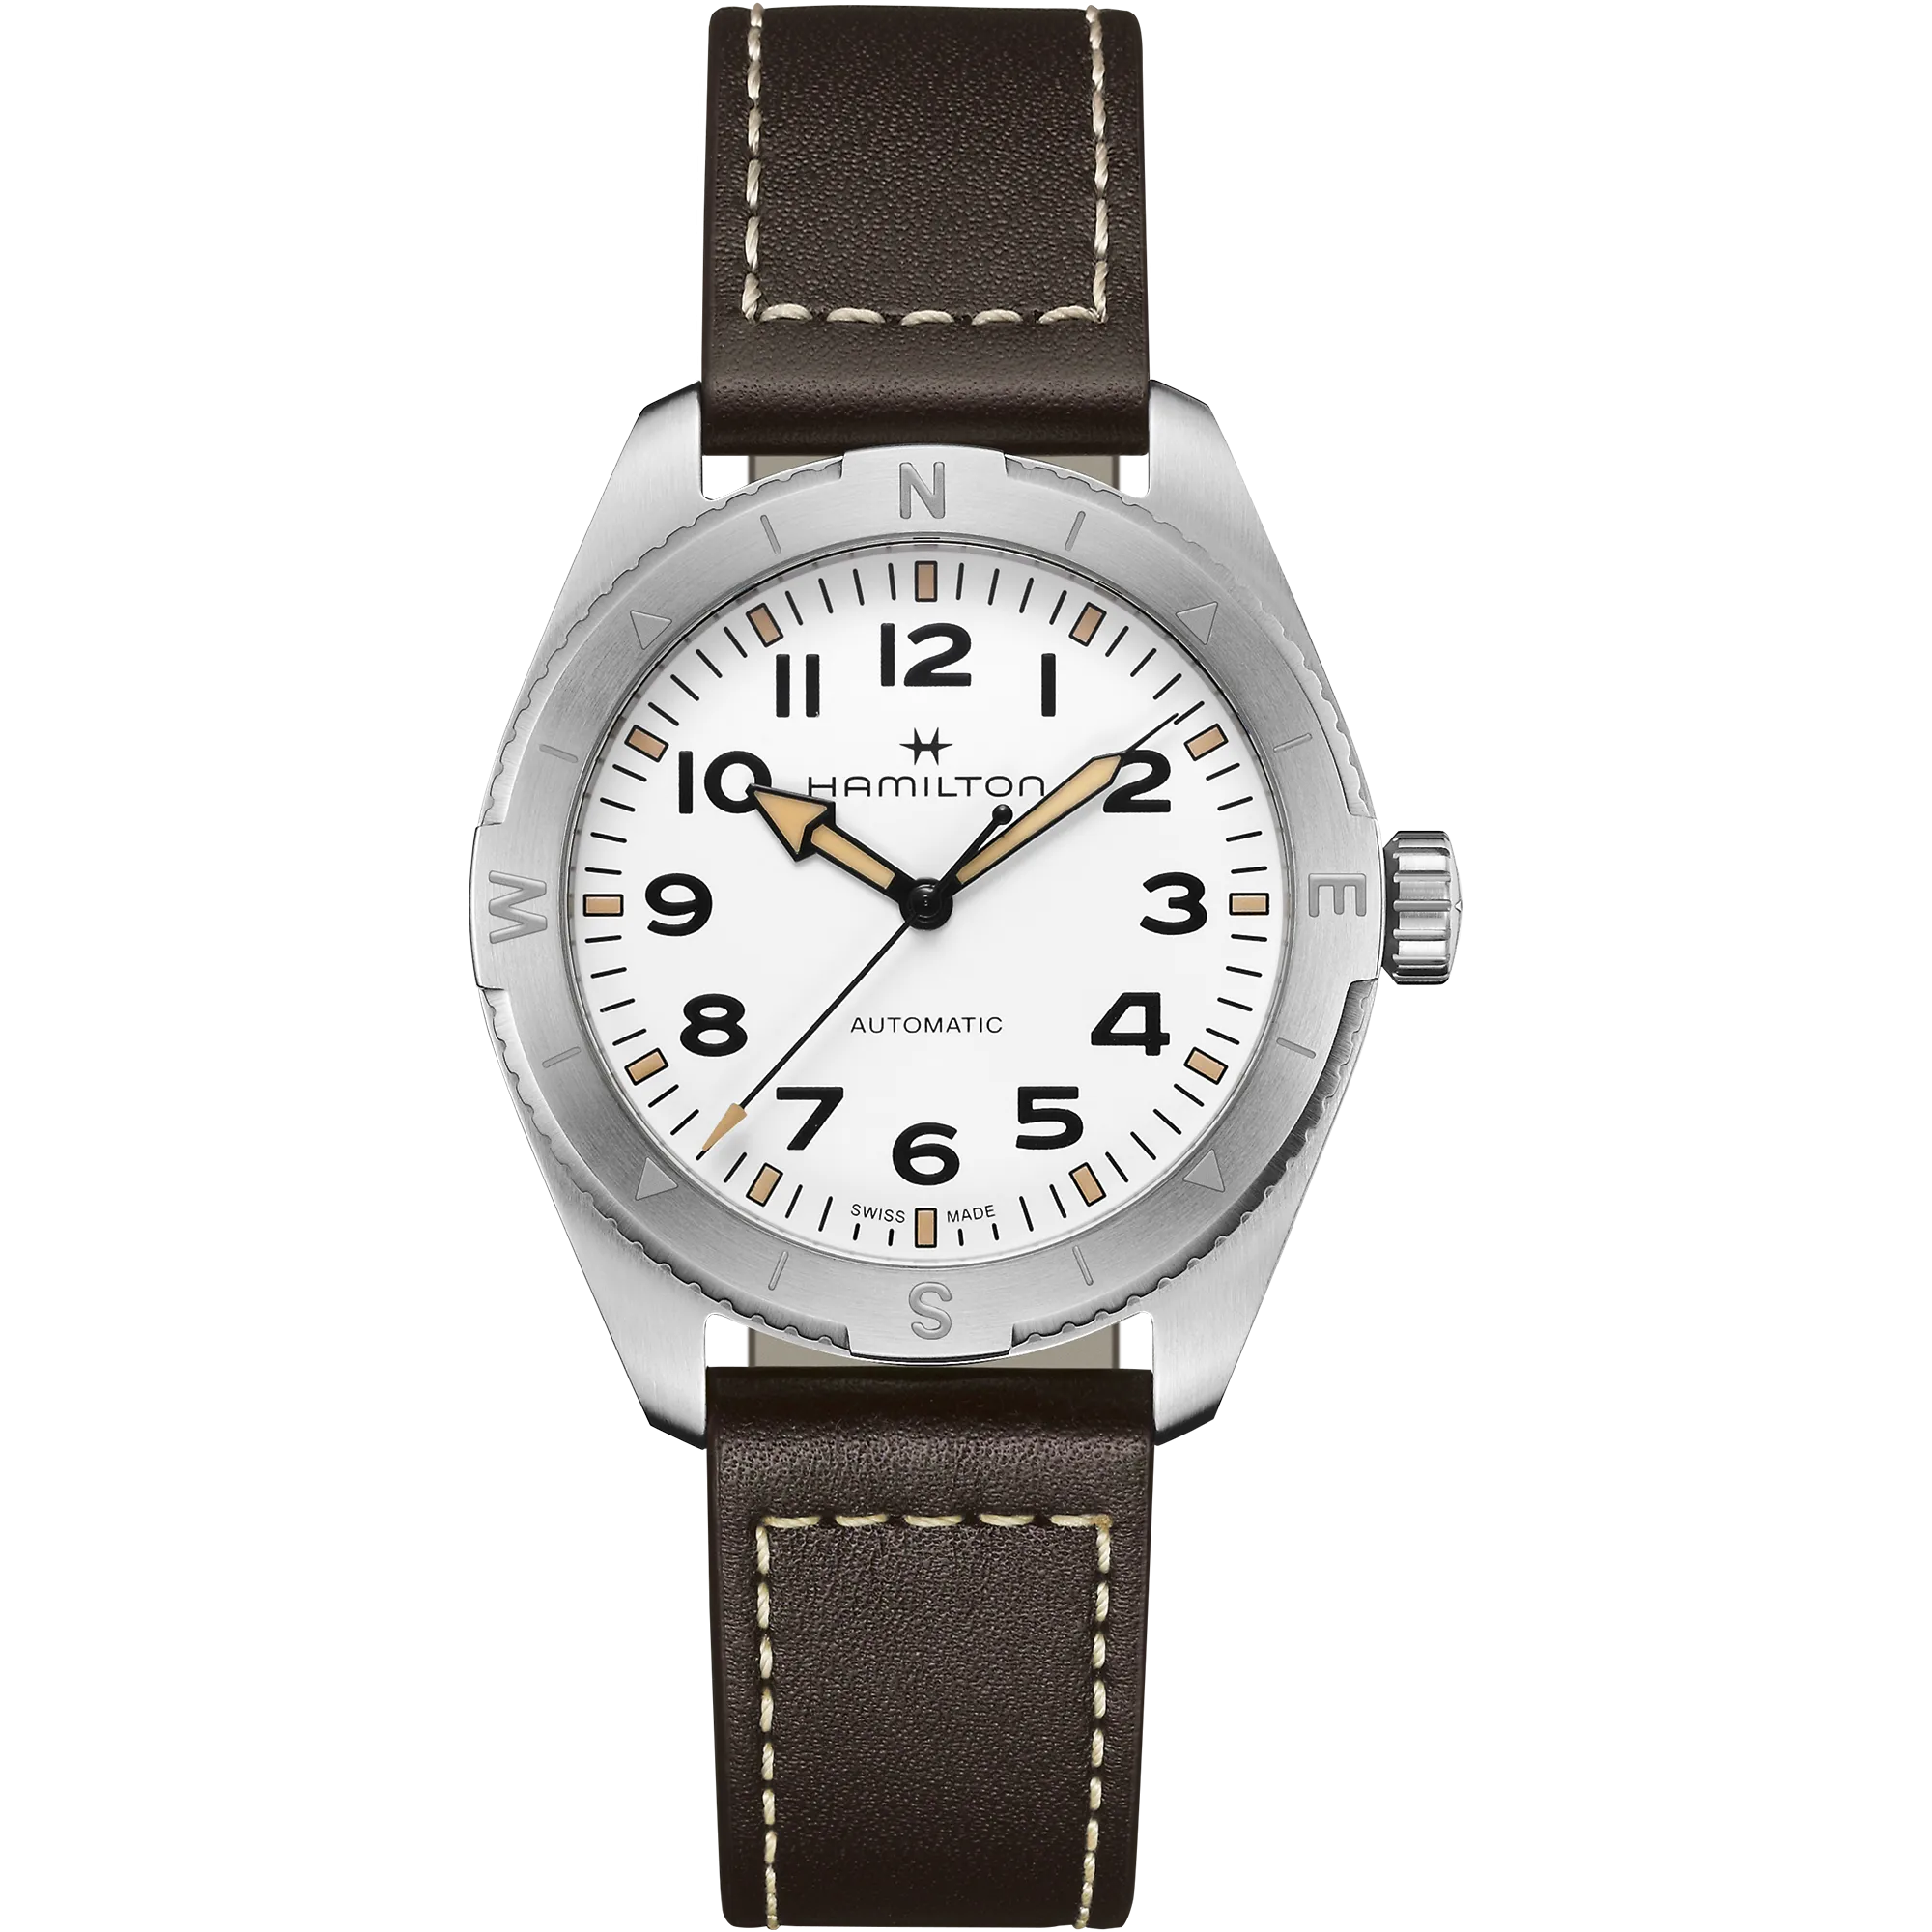 Khaki Field Expedition Auto - 41mm - H70315510